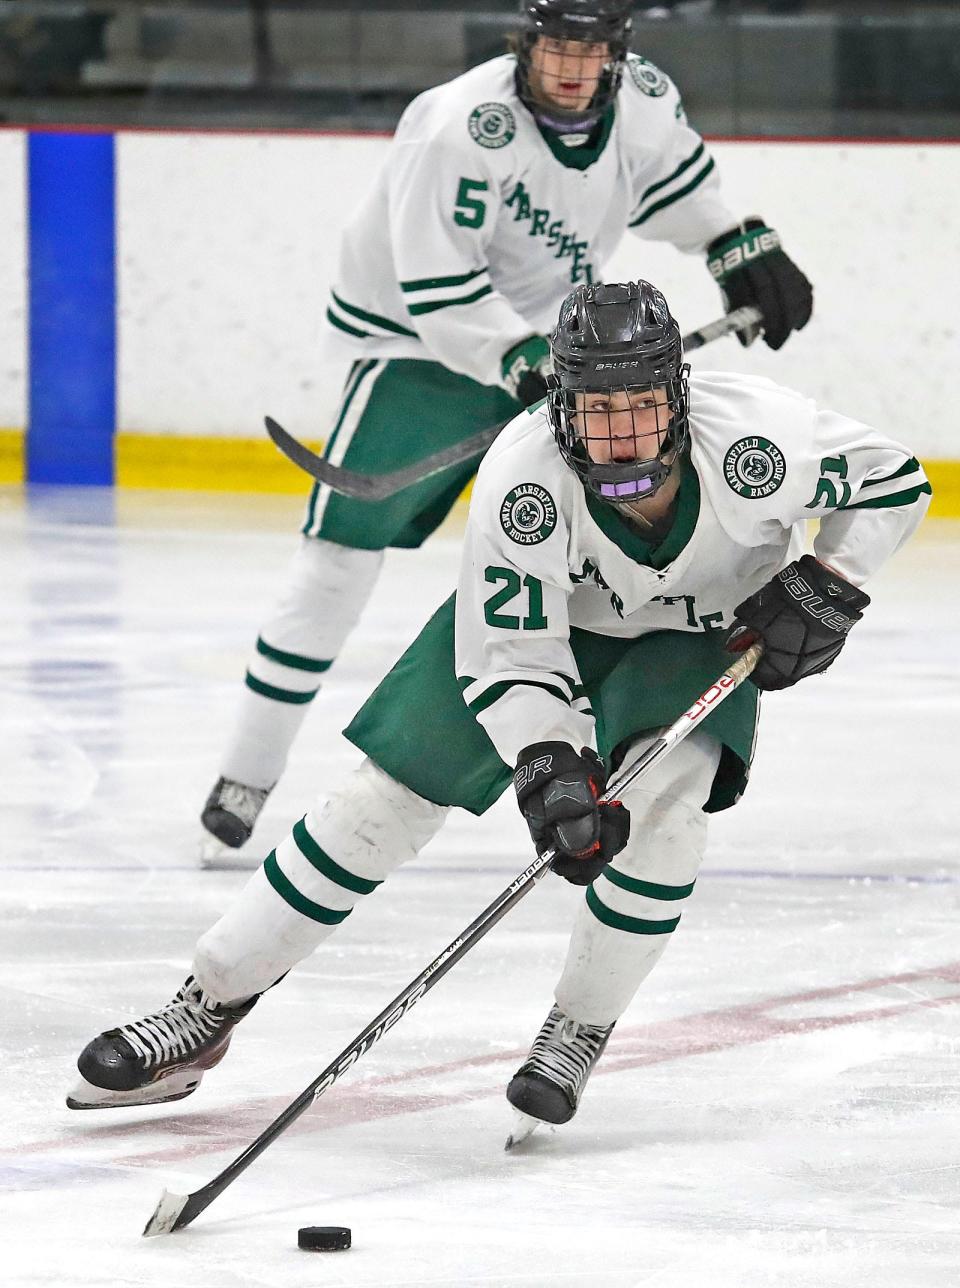 Rams #21 Teddy Devoe makes a move across the red line with support from Ryland McGlame.Marshfield hosted Xaverian in boys hockey at The Bog in Kingston on Thursday February 23, 2023 